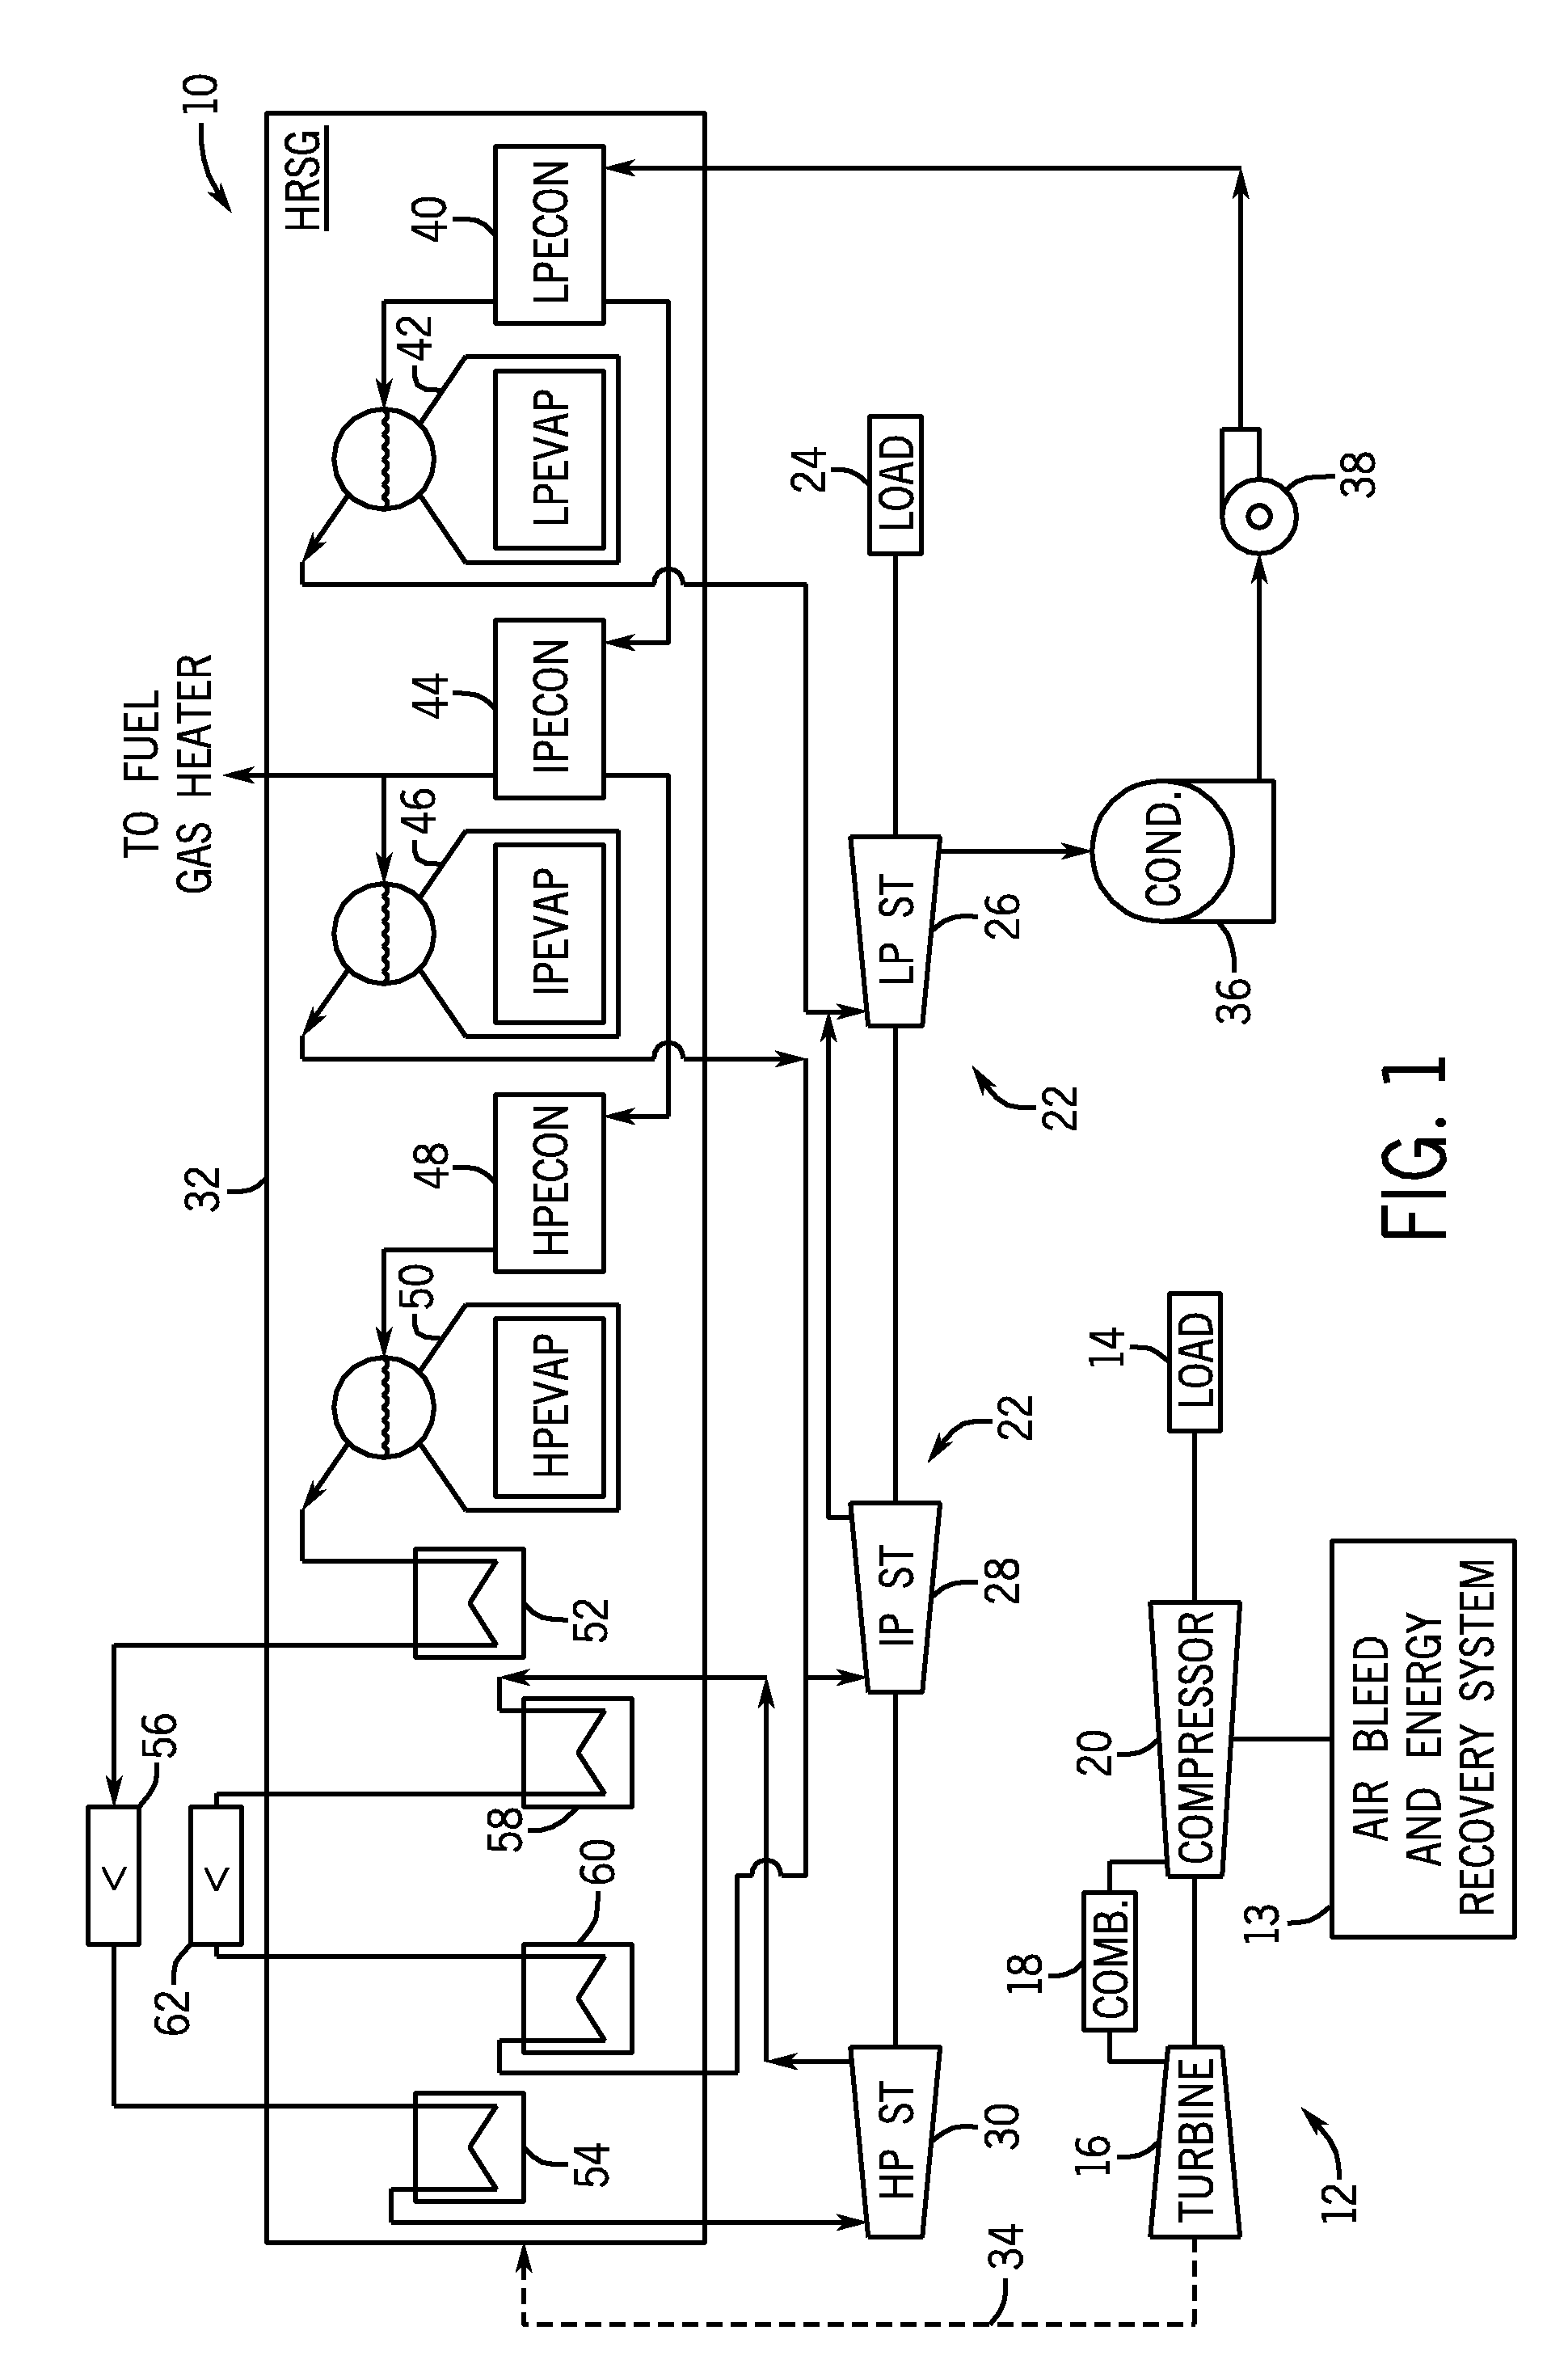 Method for expanding compressor discharge bleed air